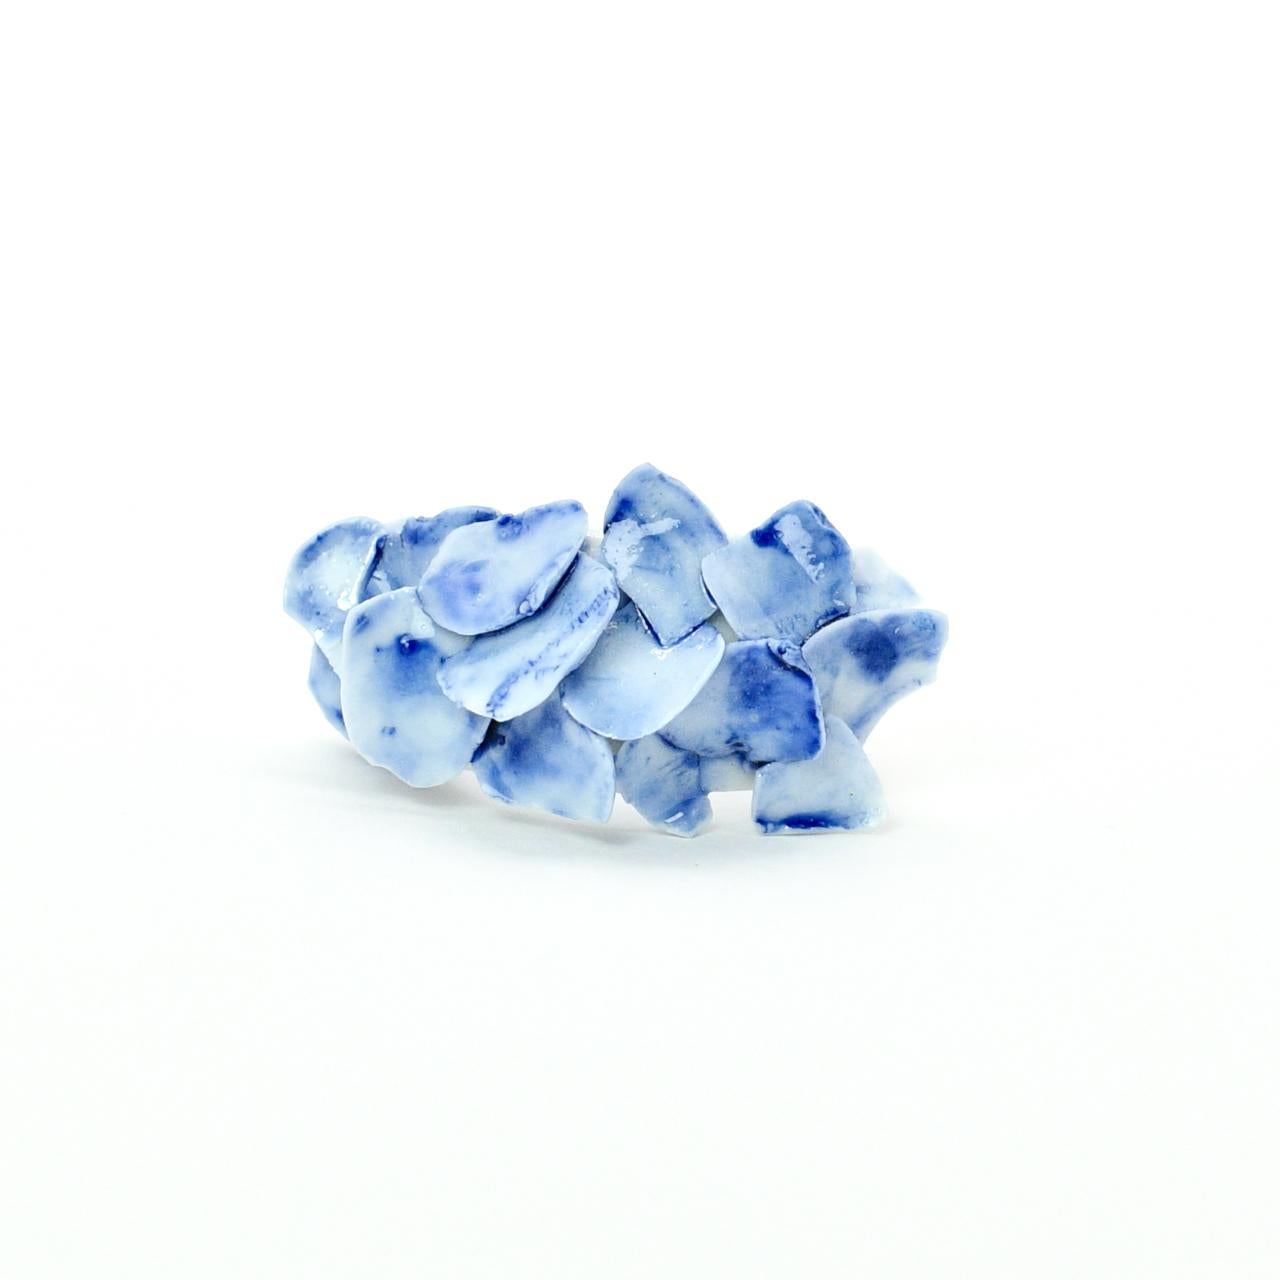 Porcelain  Handmade in London

Introducing PLENEAU Porcelain Ceramic Ring that is pure art in its functional form. Crafted from the finest porcelain, this piece resembles a stunning shard of ice pieces, creating a wearable sculpture that exudes